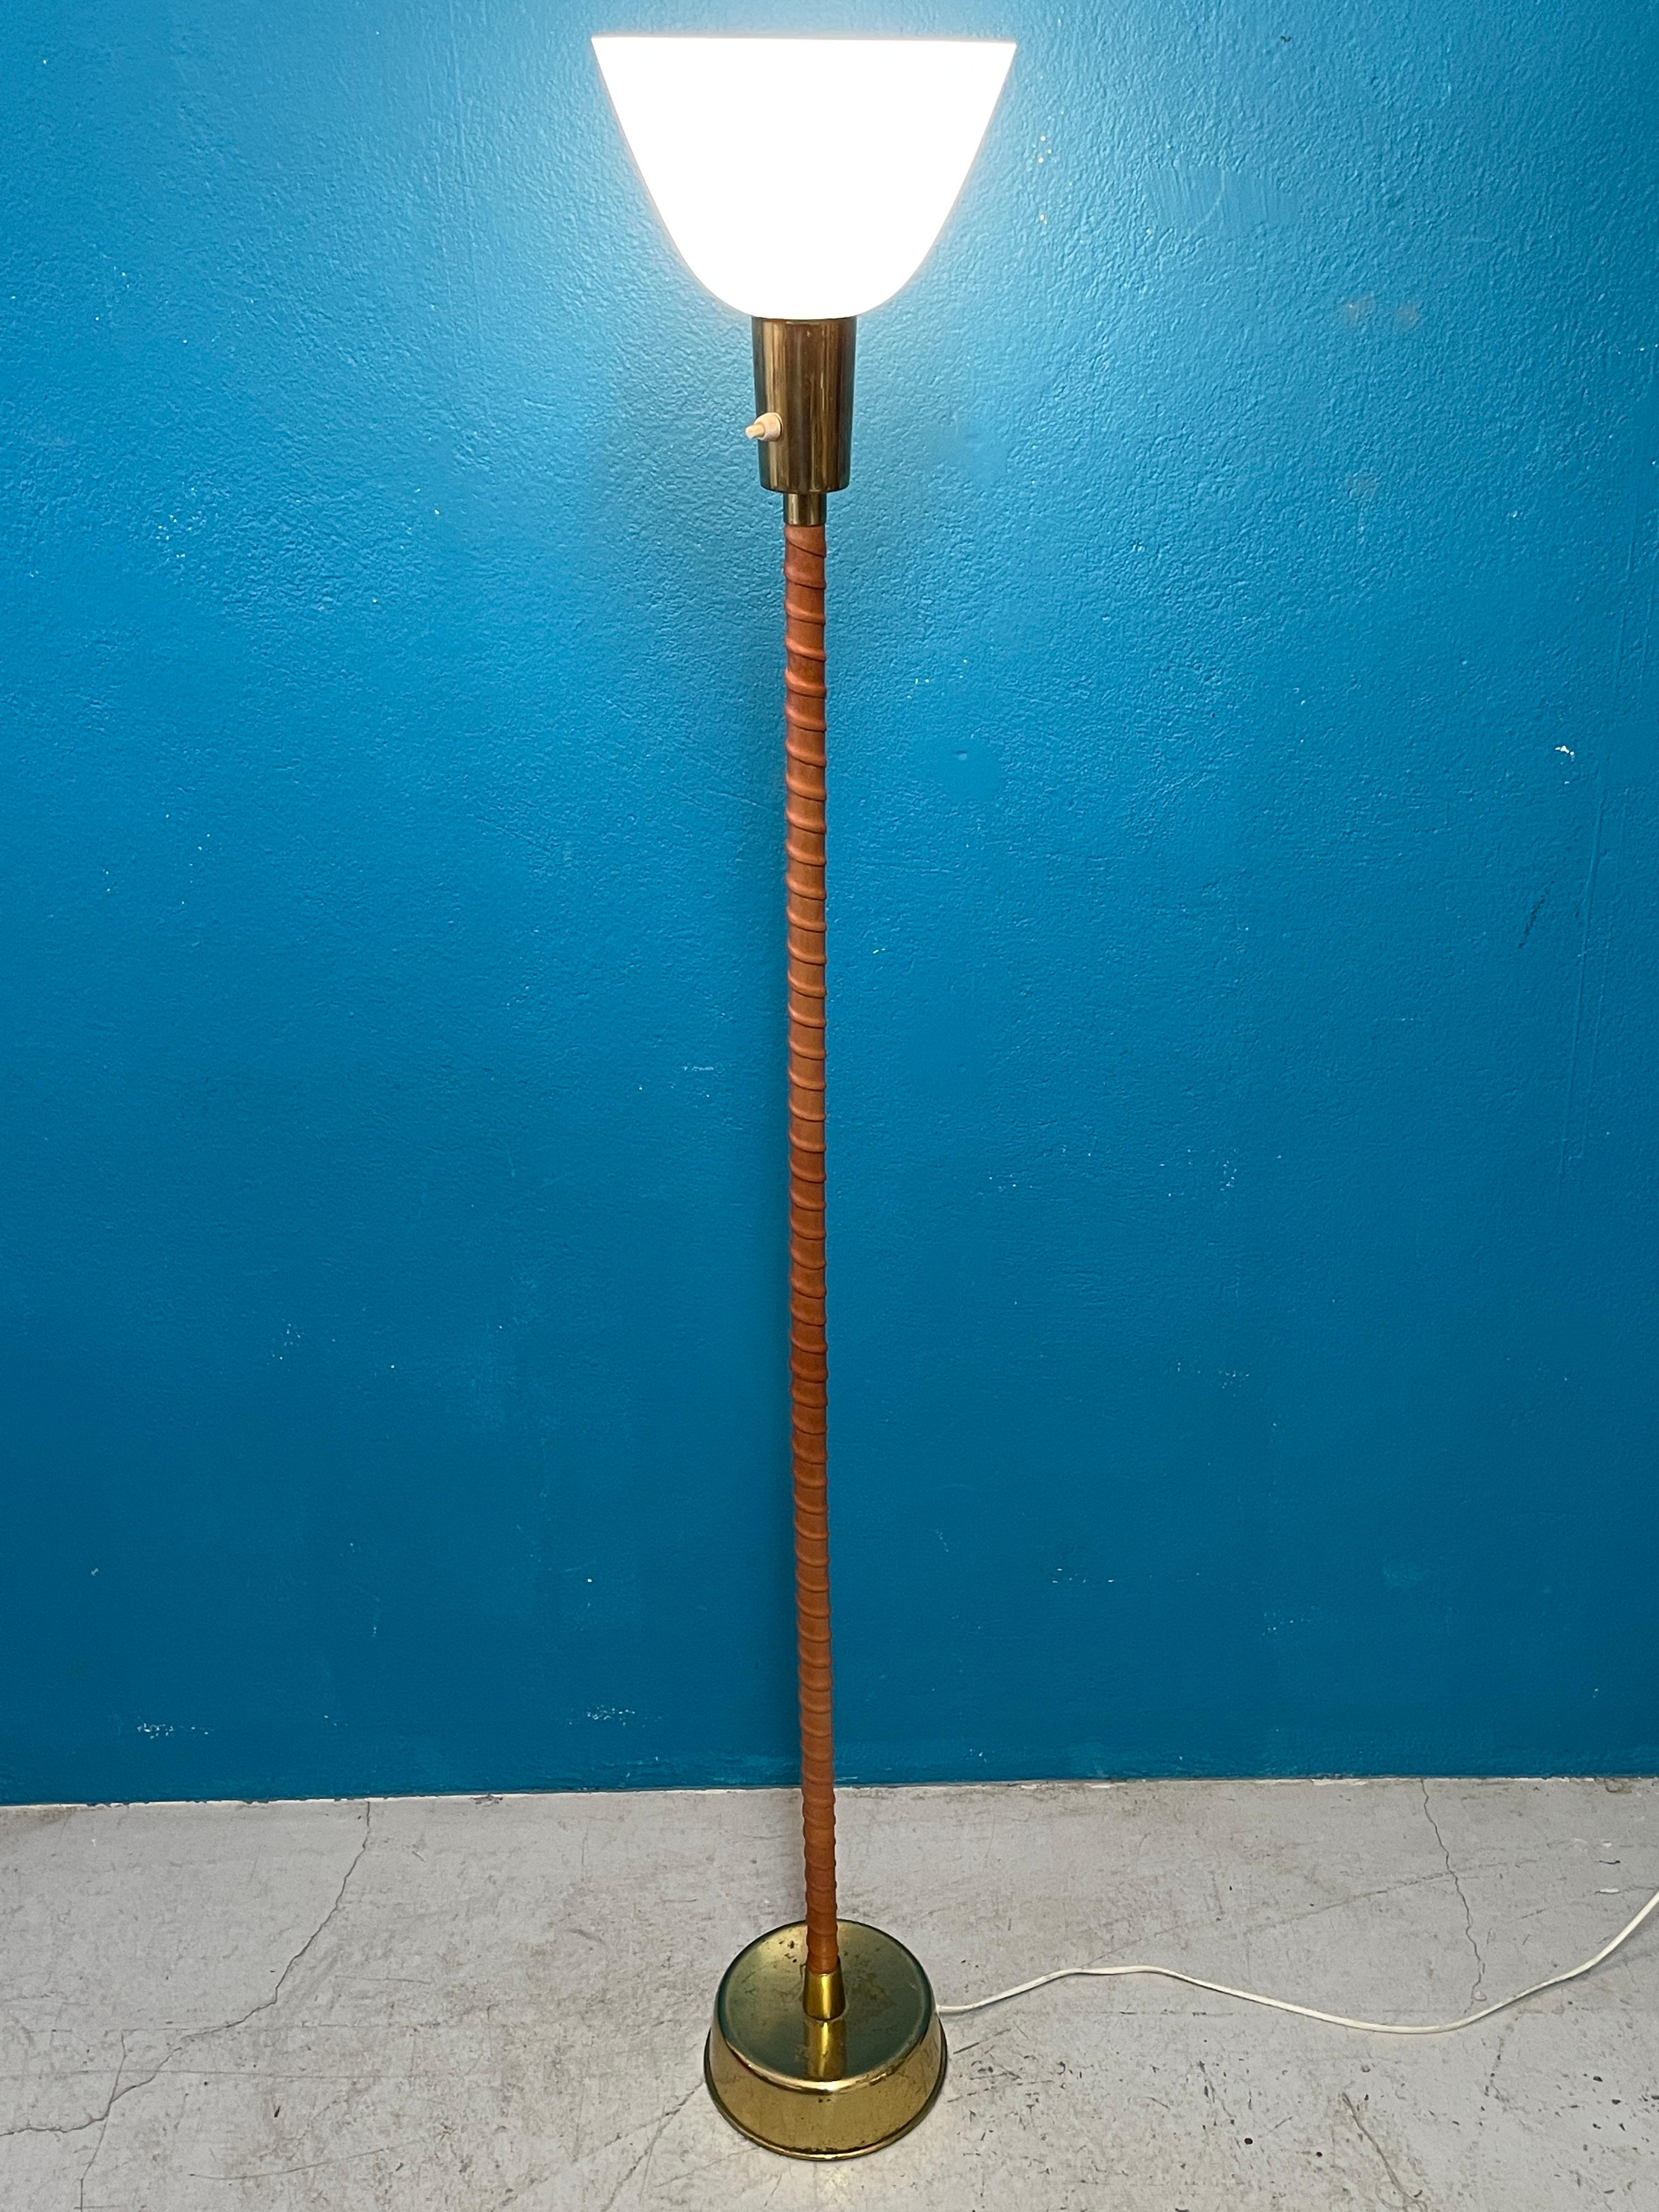 Beautiful and fully original Floor Lamp designed by Lisa Johansson-Pipe. This version was the first one to be produced in the 1950s and is a quite rare find especially in this good vintage condition. Acrylic shade is also in good condition.

Brass